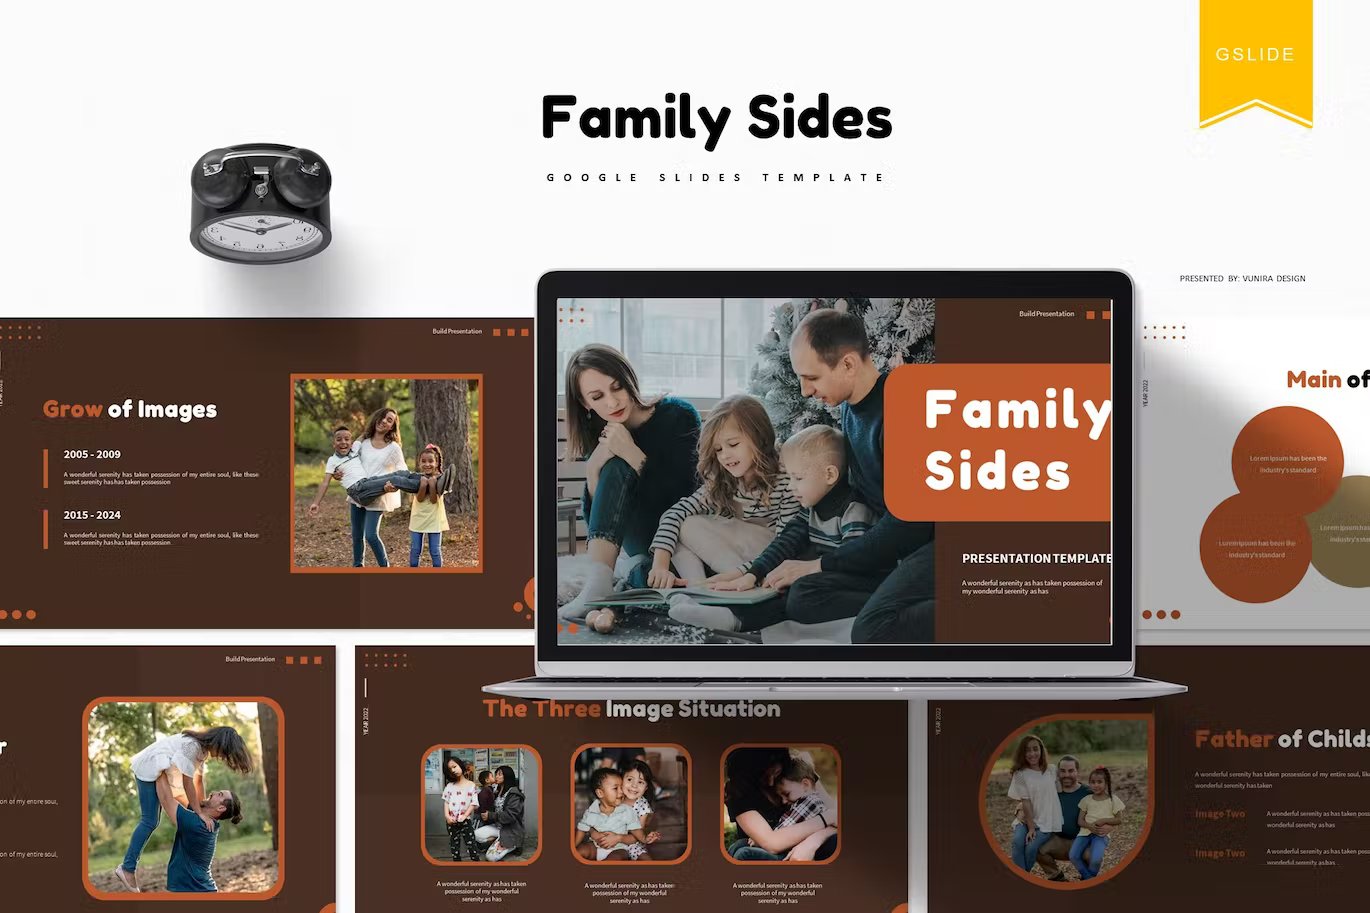 Black lettering "Family Sides Google Slides Template" and different presentation templates on a white background.